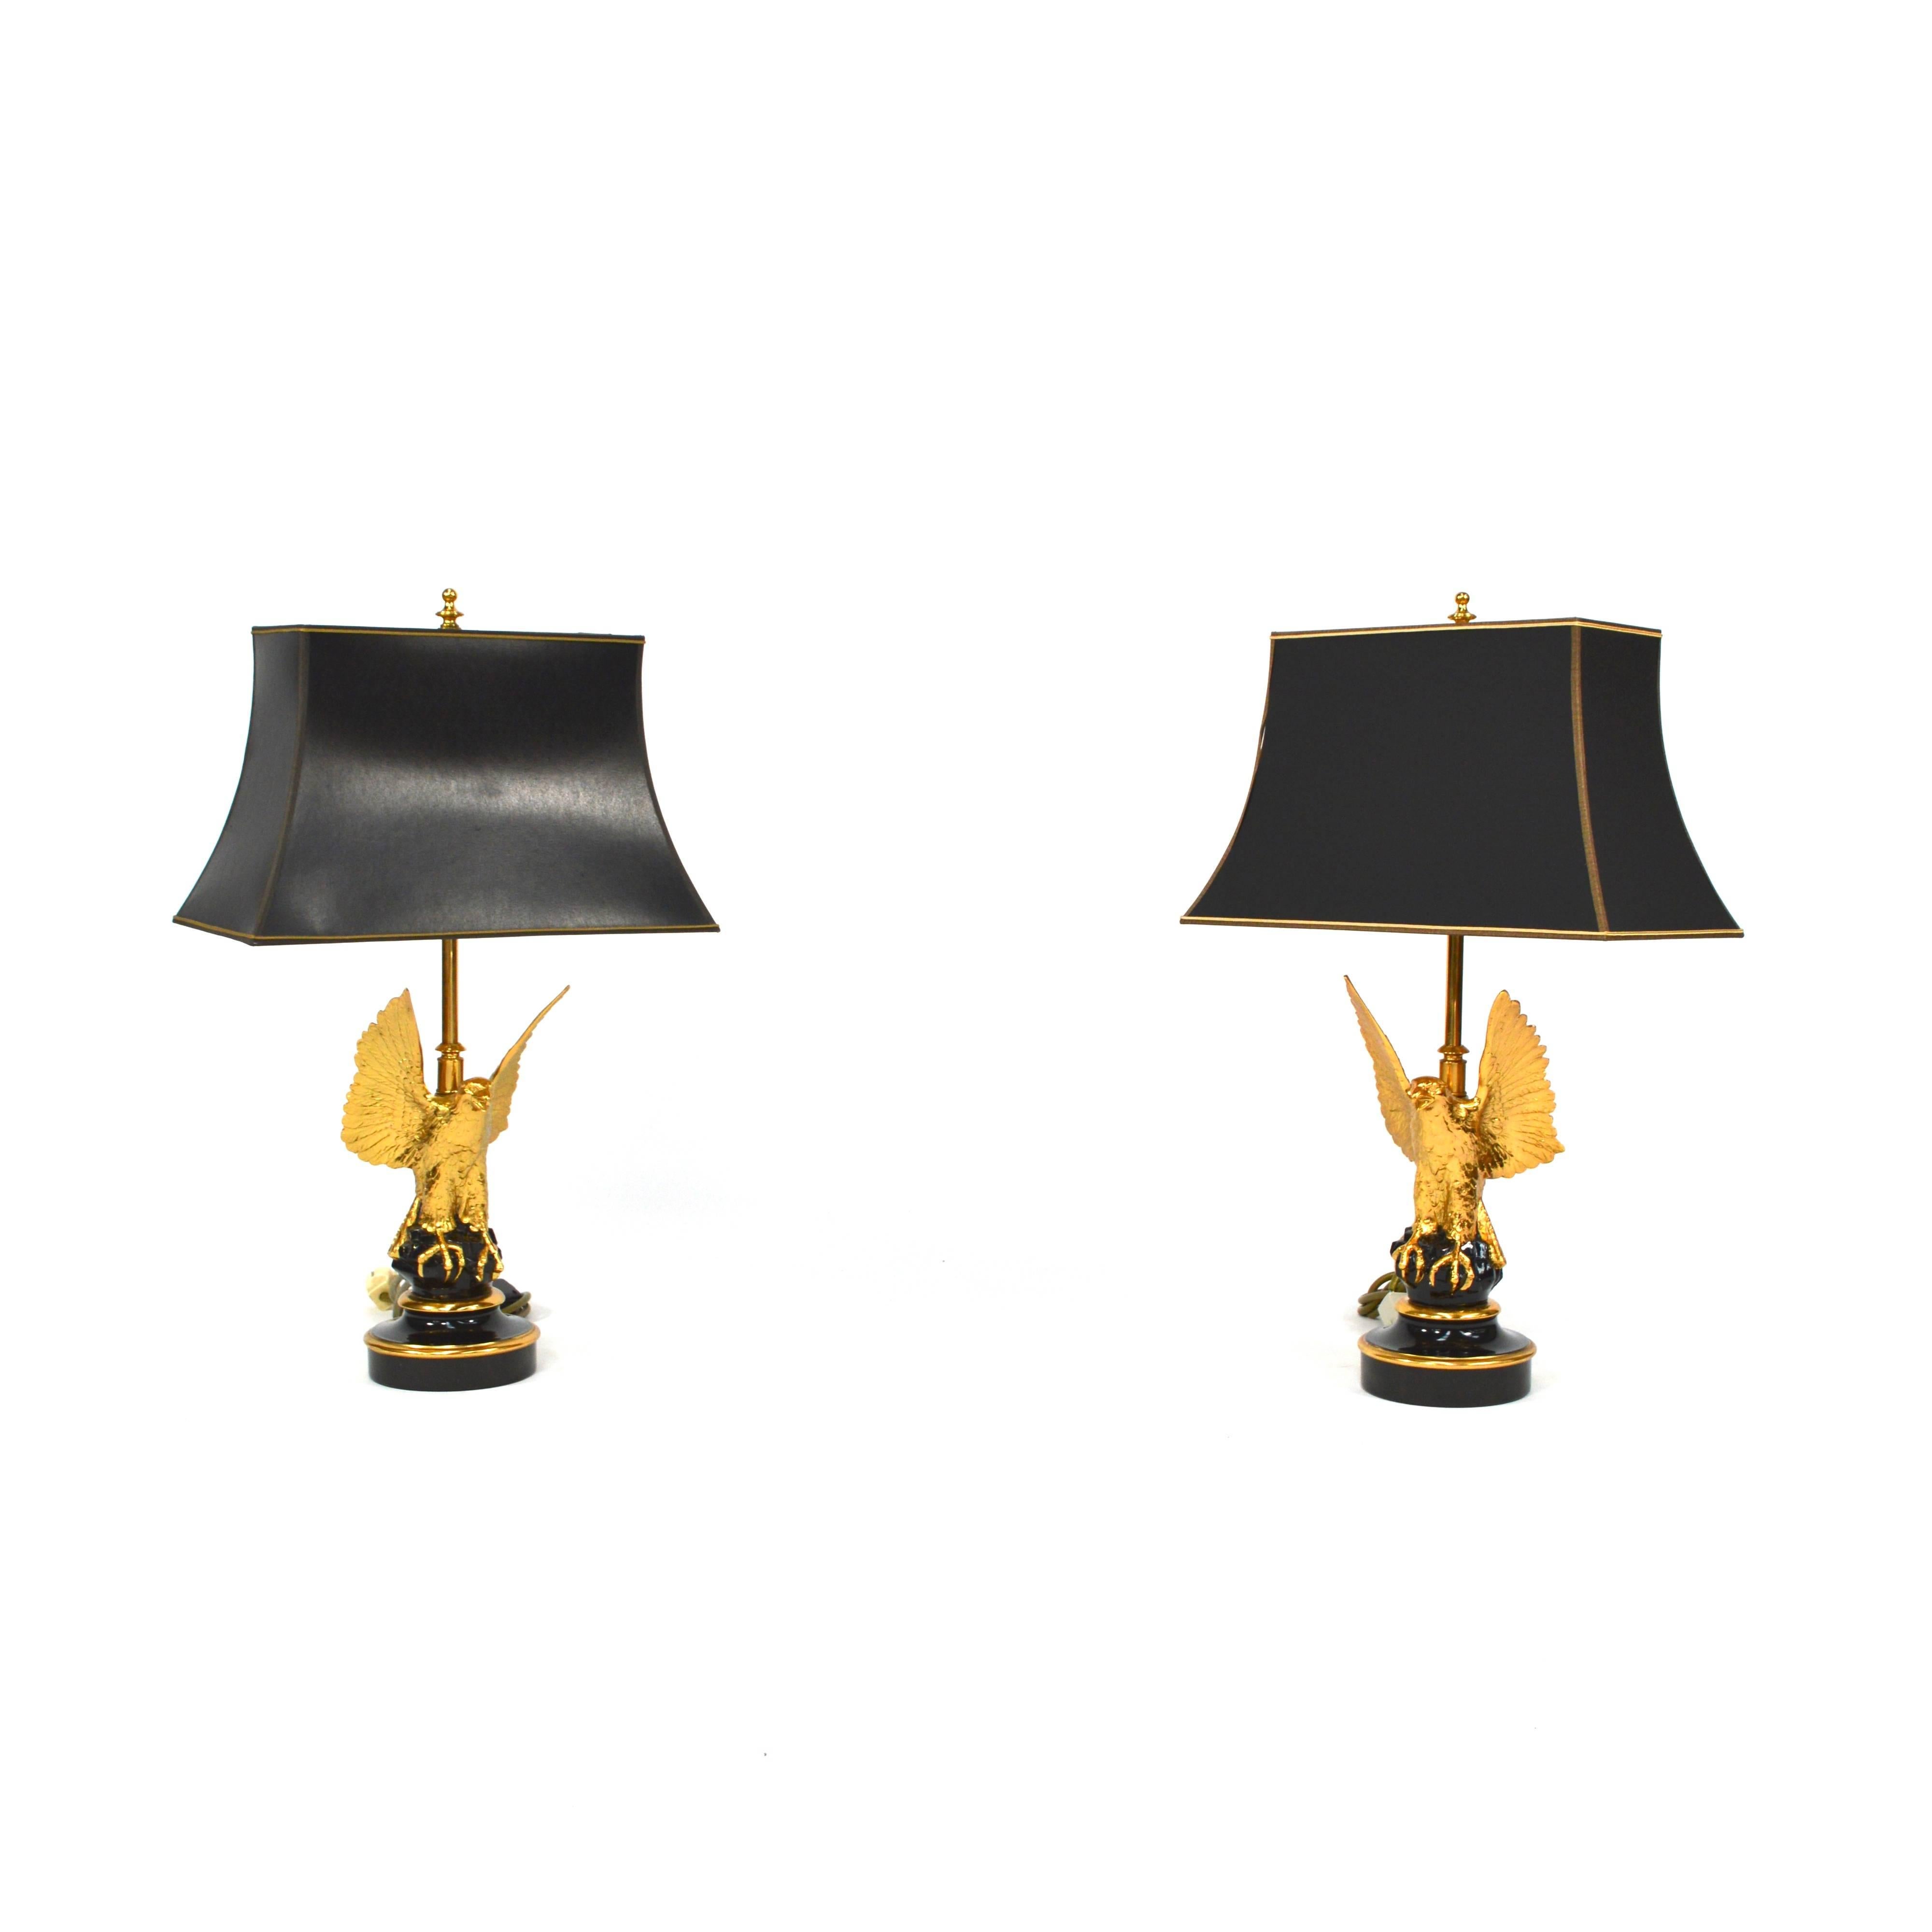 Beautiful pair of gilded eagle table lamps by DeKnudt - Belgium.
The lamps have three light bulbs that can be turned on separate from each other to create a dimming effect.
     